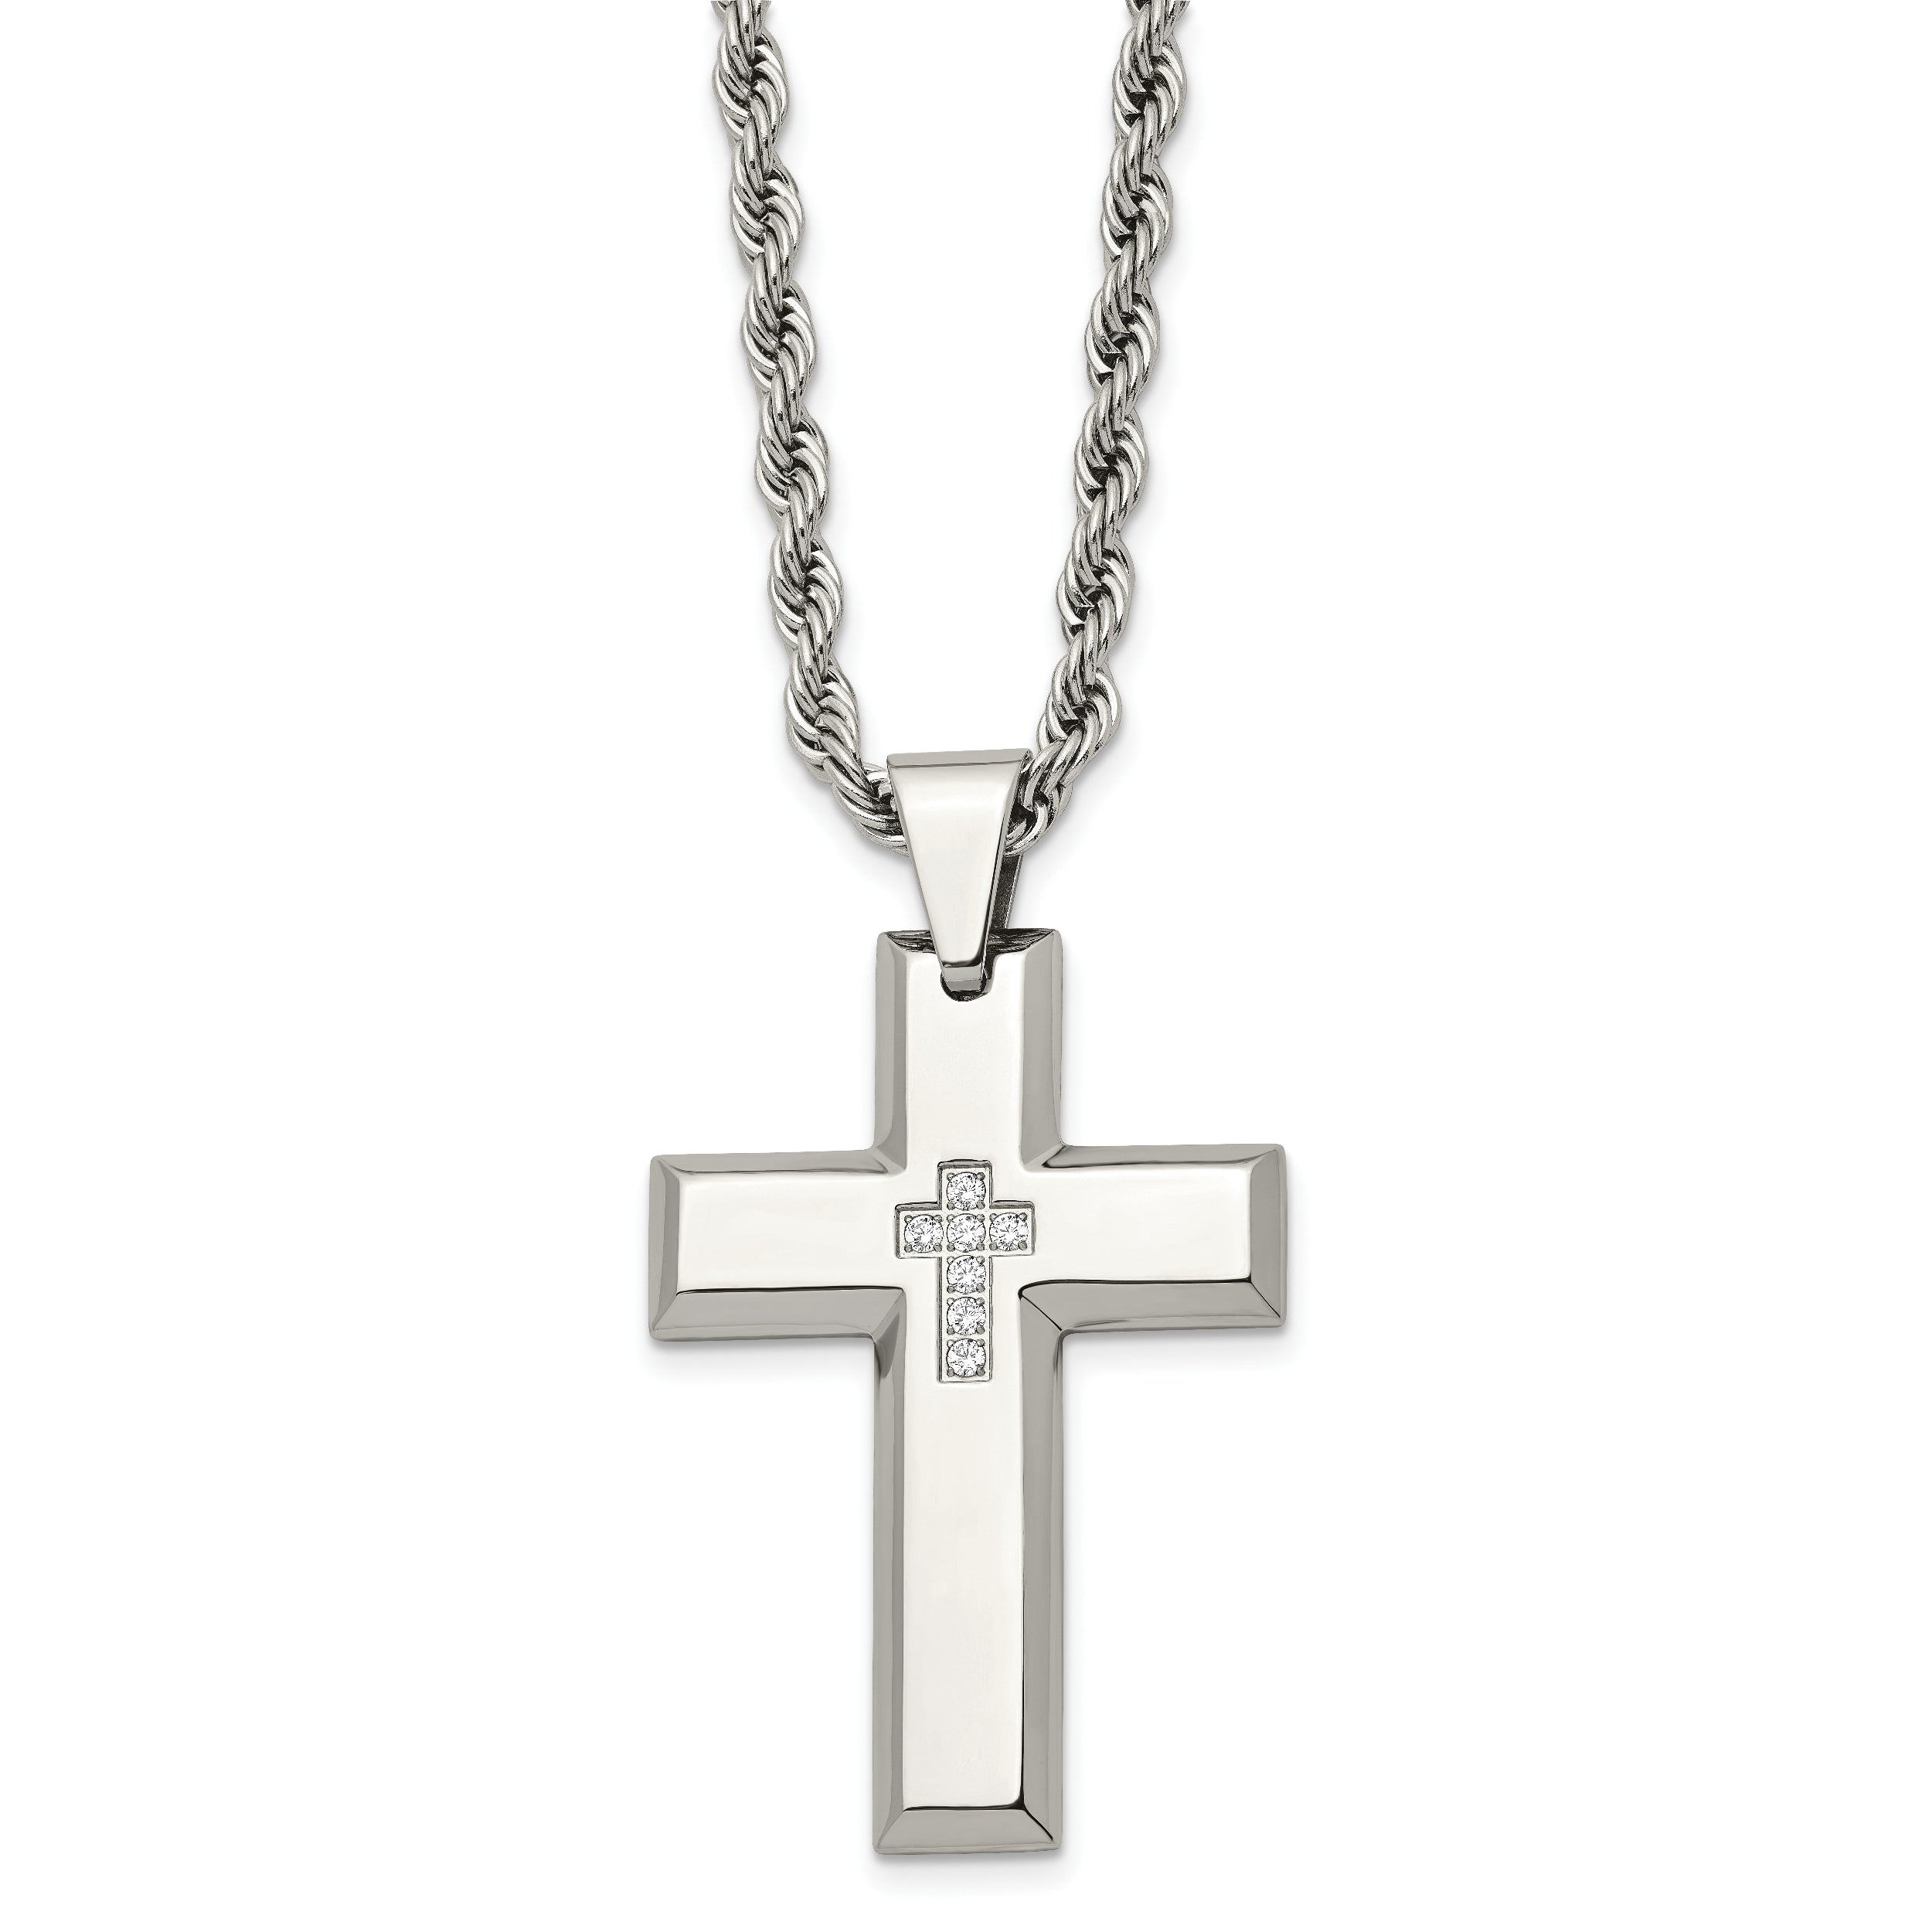 Chisel Stainless Steel Polished with CZ Cross Pendant on a 24 inch Rope Chain Necklace